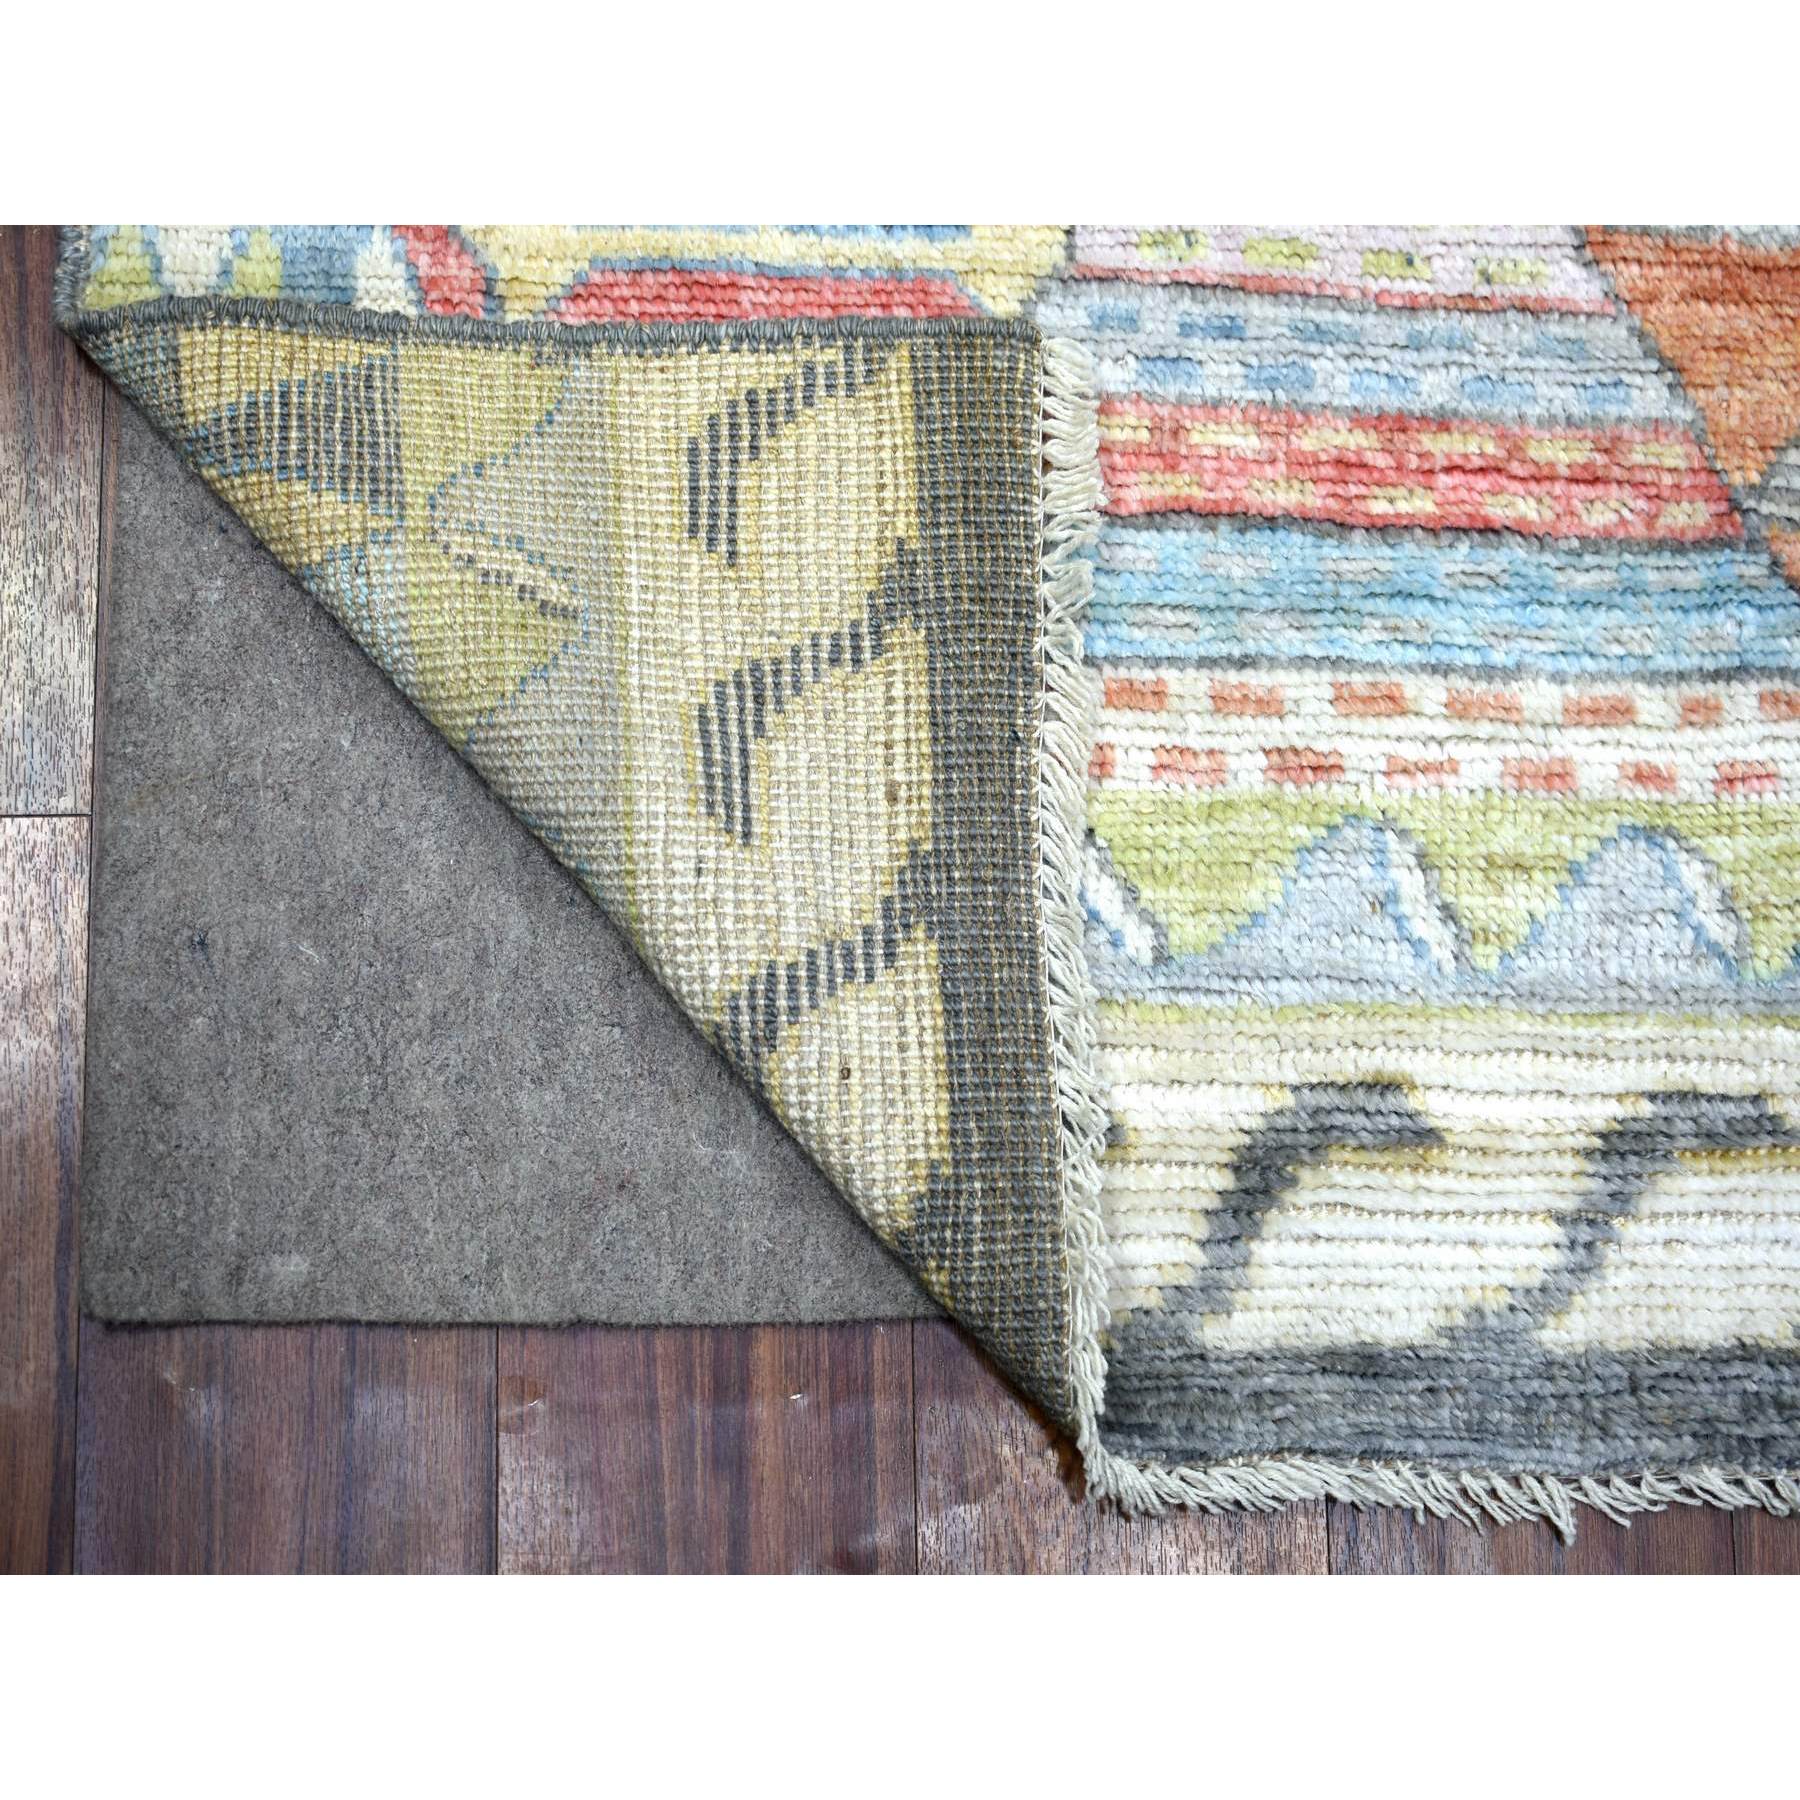 4'x6'2" Colorful, Pure Wool Hand Woven, Anatolian Village Inspired Patchwork Design Natural Dyes, Oriental Rug 